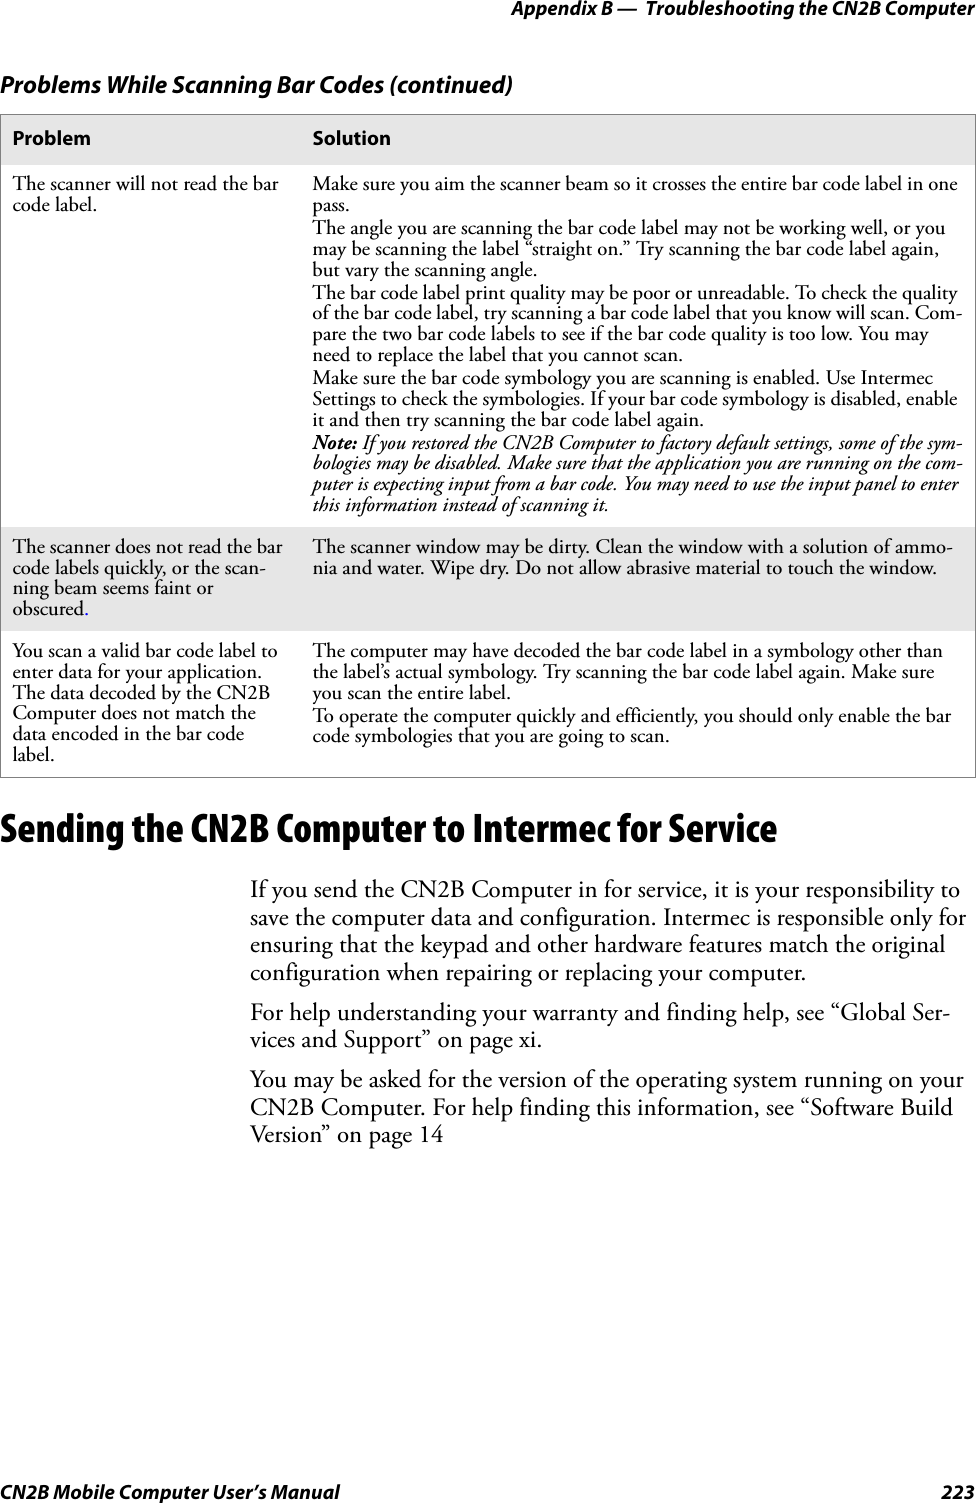 Appendix B —  Troubleshooting the CN2B ComputerCN2B Mobile Computer User’s Manual 223Sending the CN2B Computer to Intermec for ServiceIf you send the CN2B Computer in for service, it is your responsibility to save the computer data and configuration. Intermec is responsible only for ensuring that the keypad and other hardware features match the original configuration when repairing or replacing your computer. For help understanding your warranty and finding help, see “Global Ser-vices and Support” on page xi.You may be asked for the version of the operating system running on your CN2B Computer. For help finding this information, see “Software Build Version” on page 14The scanner will not read the bar code label.  Make sure you aim the scanner beam so it crosses the entire bar code label in one pass.The angle you are scanning the bar code label may not be working well, or you may be scanning the label “straight on.” Try scanning the bar code label again, but vary the scanning angle.The bar code label print quality may be poor or unreadable. To check the quality of the bar code label, try scanning a bar code label that you know will scan. Com-pare the two bar code labels to see if the bar code quality is too low. You may need to replace the label that you cannot scan.Make sure the bar code symbology you are scanning is enabled. Use Intermec Settings to check the symbologies. If your bar code symbology is disabled, enable it and then try scanning the bar code label again.Note: If you restored the CN2B Computer to factory default settings, some of the sym-bologies may be disabled. Make sure that the application you are running on the com-puter is expecting input from a bar code. You may need to use the input panel to enter this information instead of scanning it.The scanner does not read the bar code labels quickly, or the scan-ning beam seems faint or obscured.The scanner window may be dirty. Clean the window with a solution of ammo-nia and water. Wipe dry. Do not allow abrasive material to touch the window.You scan a valid bar code label to enter data for your application. The data decoded by the CN2B Computer does not match the data encoded in the bar code label. The computer may have decoded the bar code label in a symbology other than the label’s actual symbology. Try scanning the bar code label again. Make sure you scan the entire label. To operate the computer quickly and efficiently, you should only enable the bar code symbologies that you are going to scan. Problems While Scanning Bar Codes (continued)Problem Solution